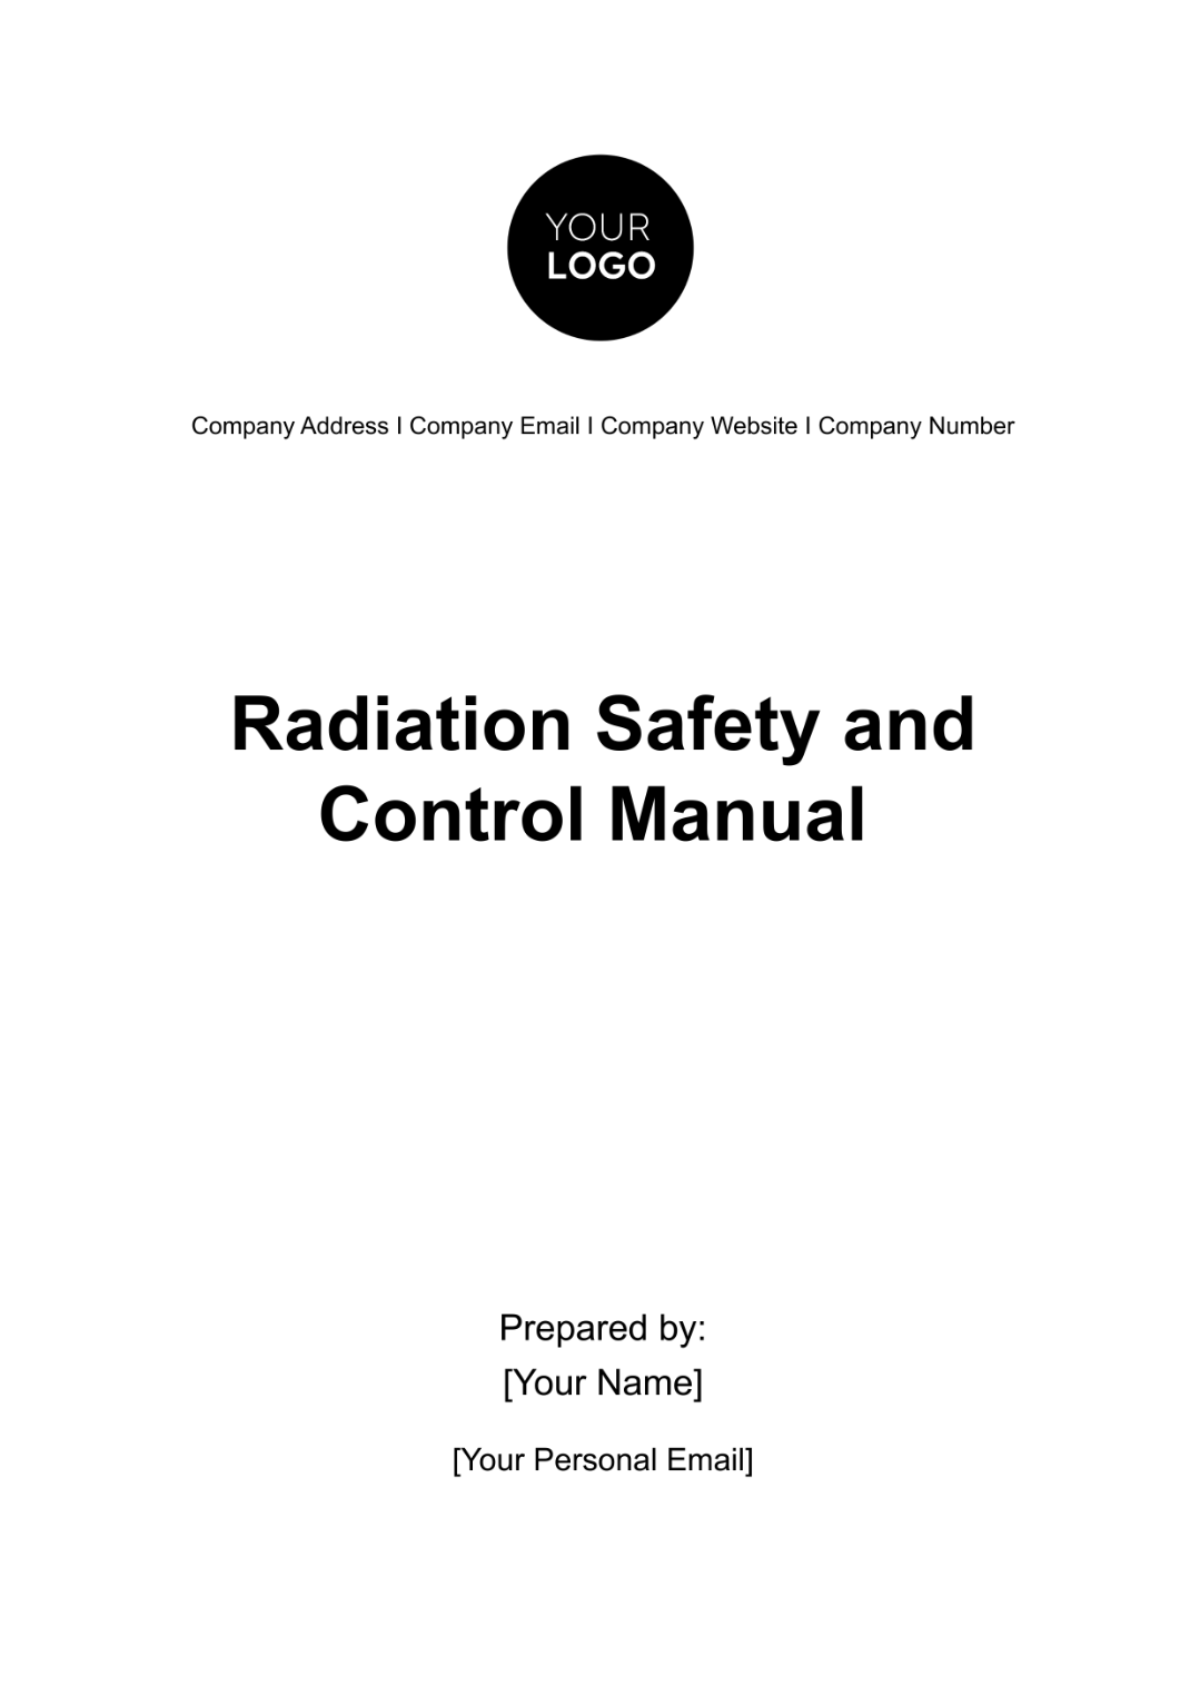 Radiation Safety and Control Manual HR Template